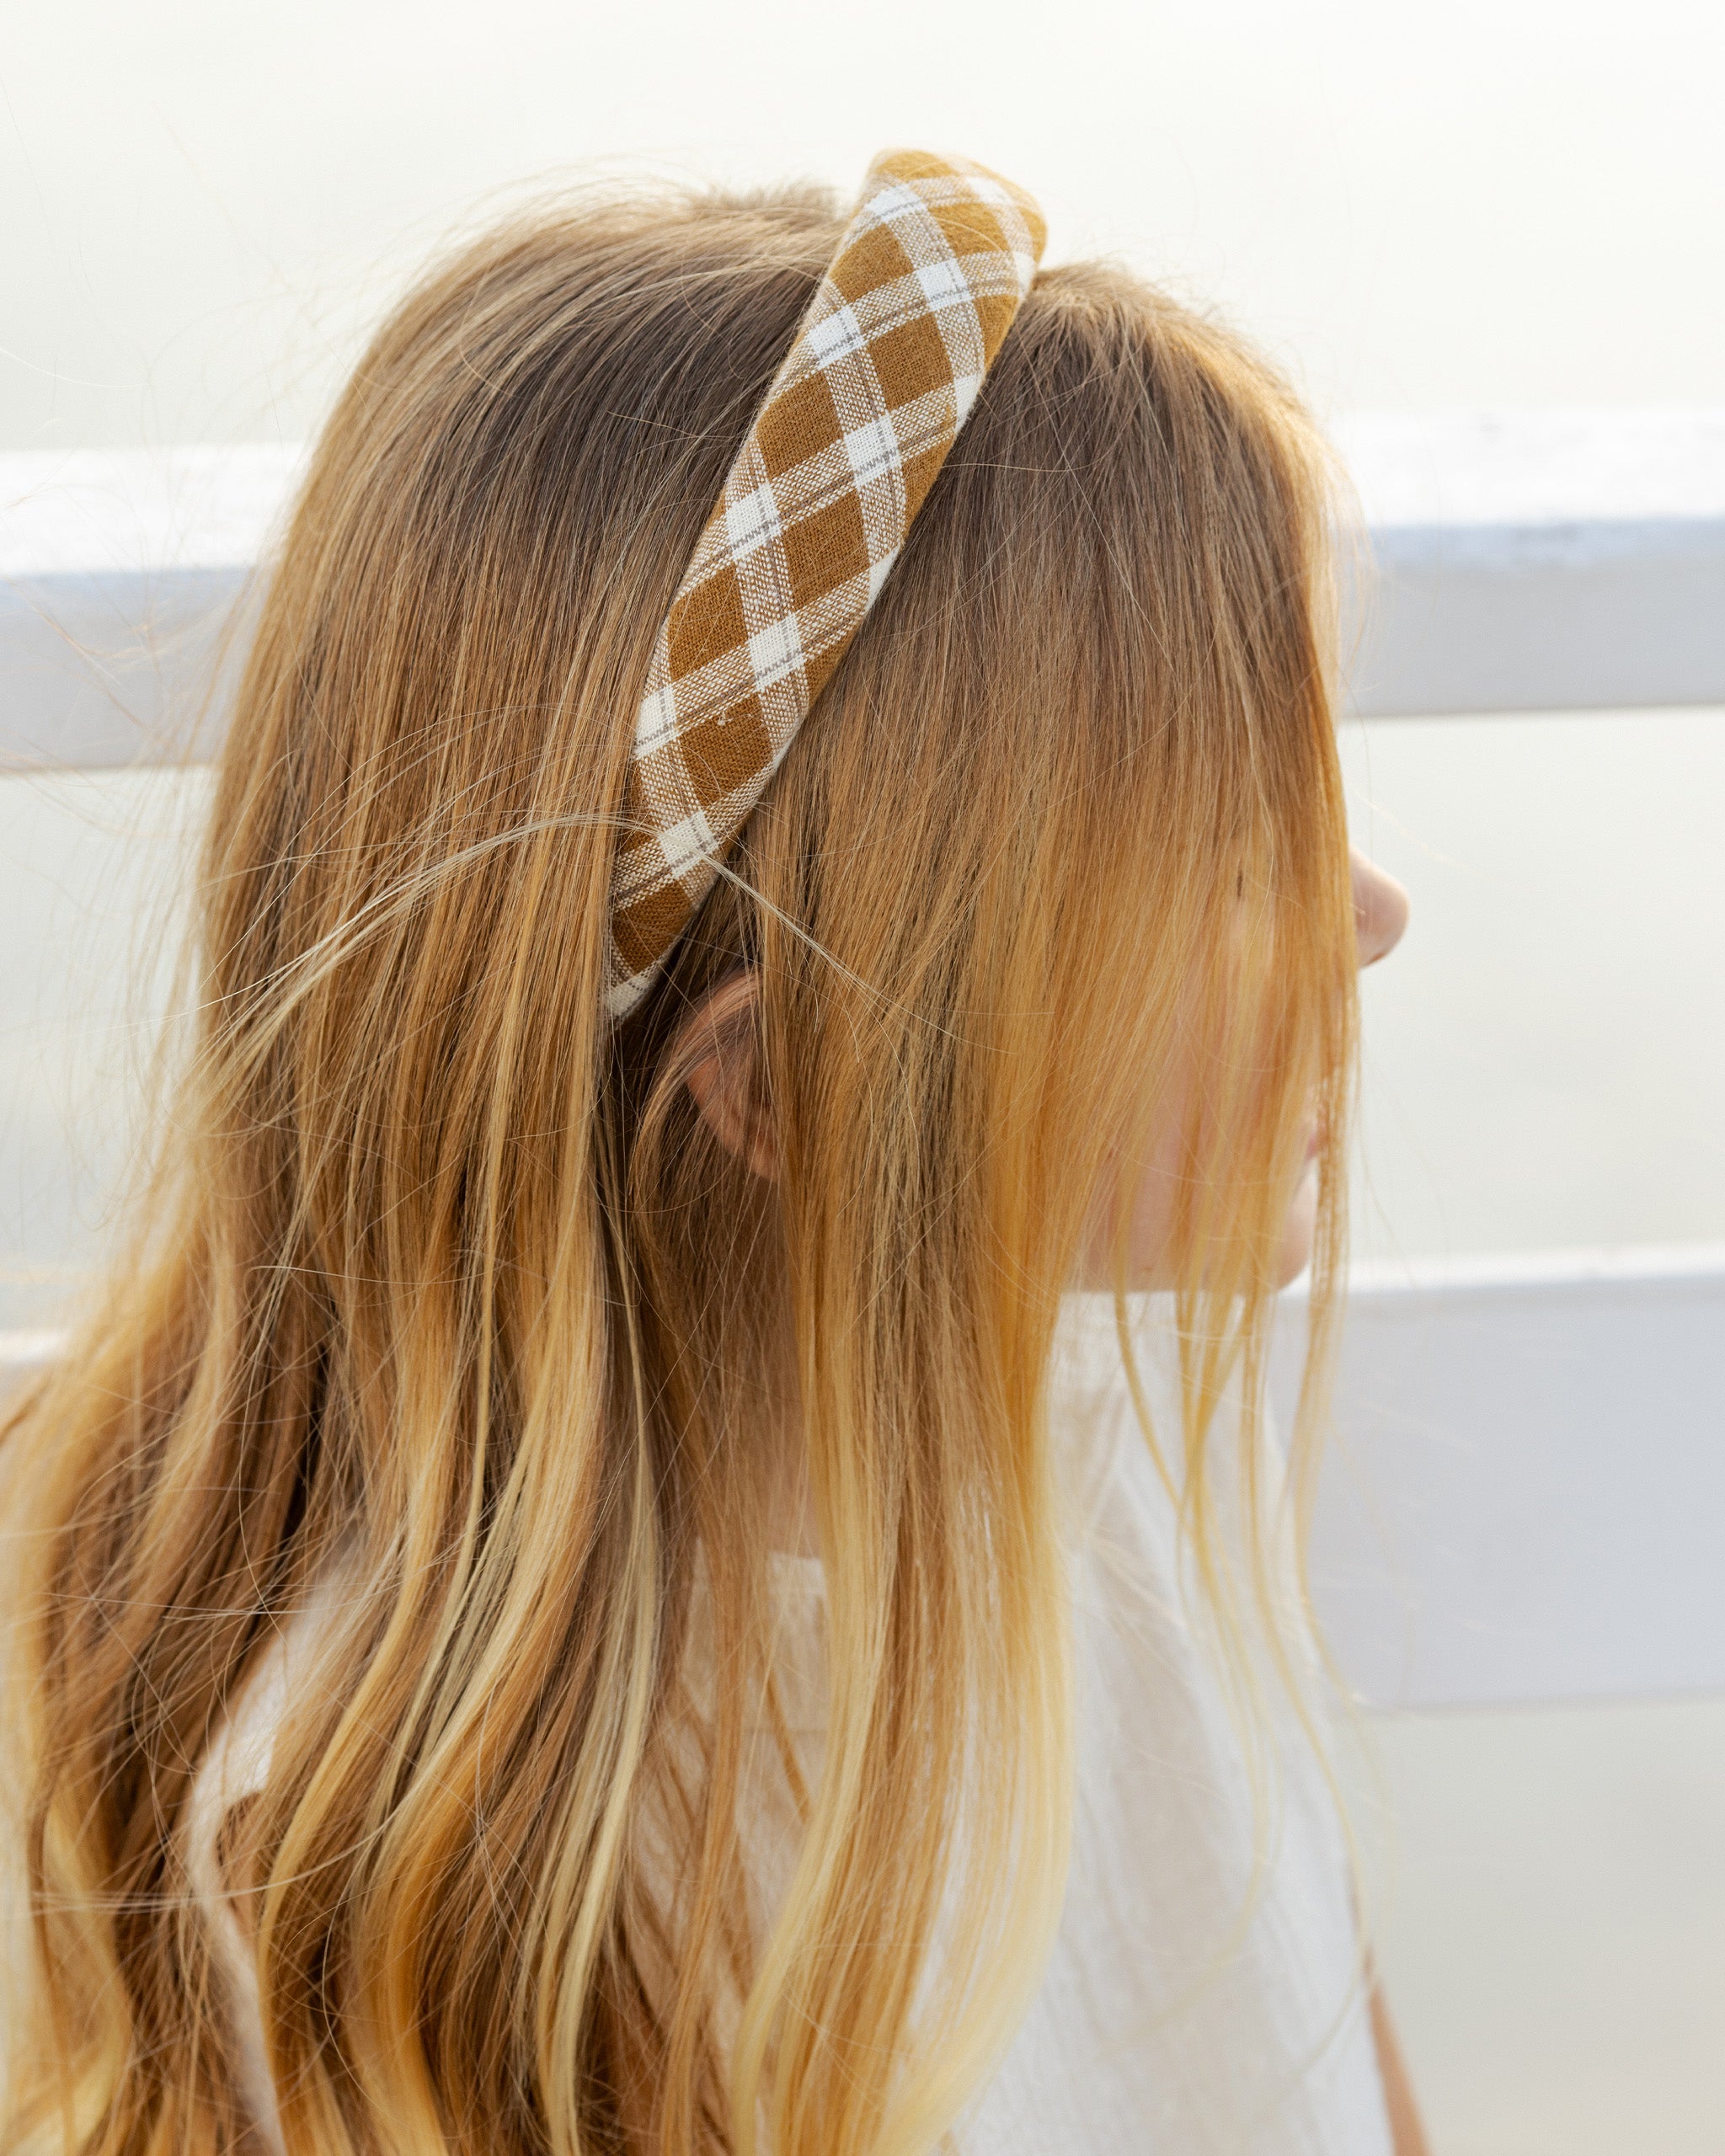 Padded Headband || Saddle Plaid - Rylee + Cru | Kids Clothes | Trendy Baby Clothes | Modern Infant Outfits |